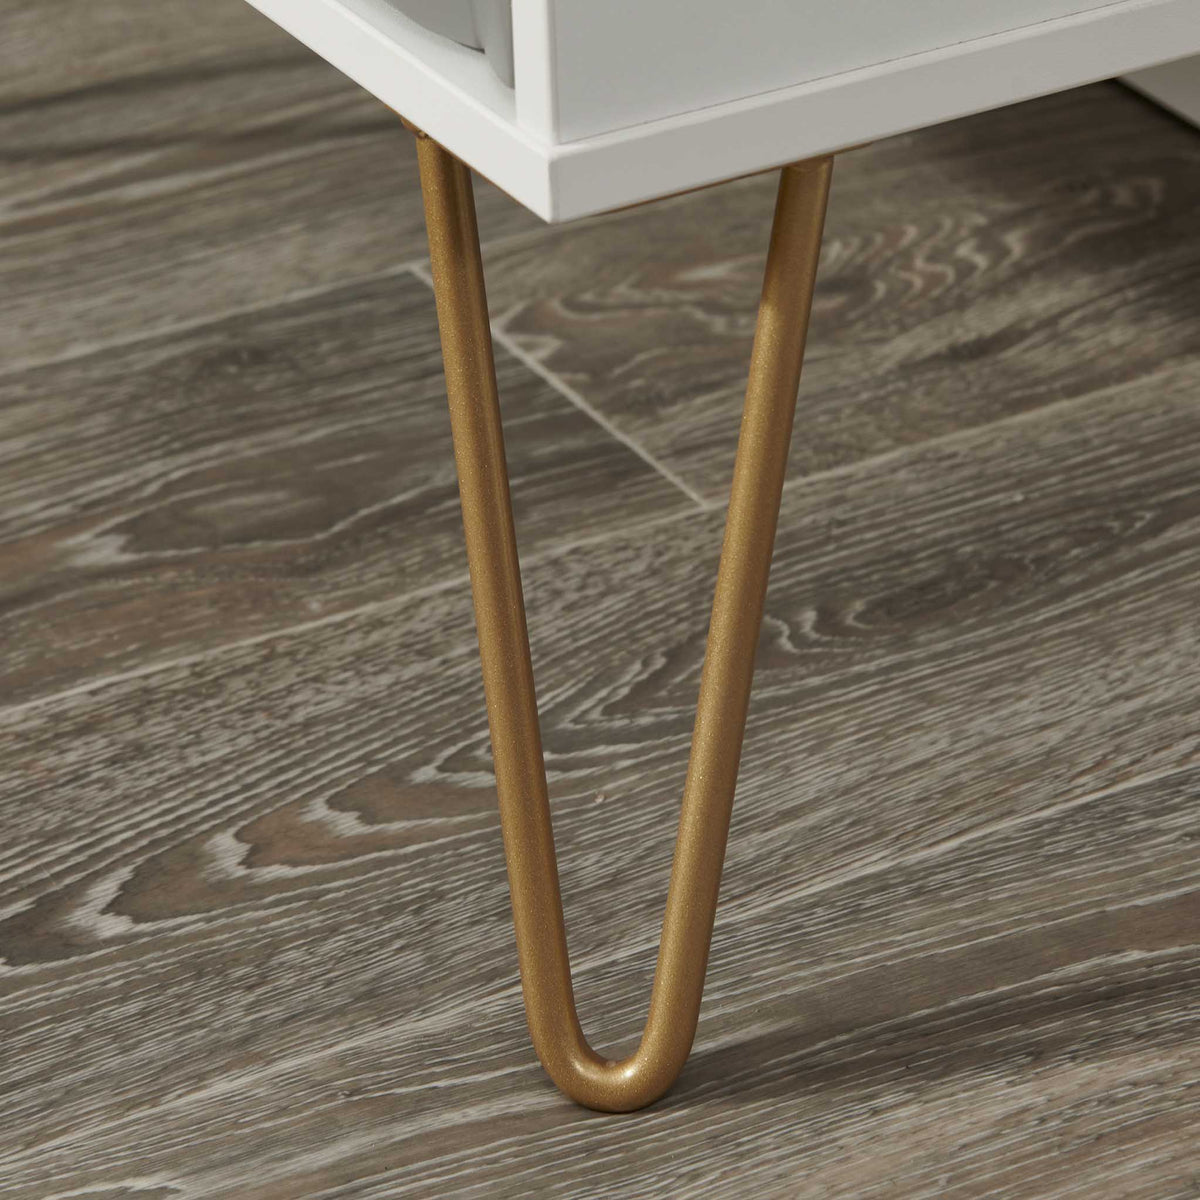 Geo 2 Drawer Bedside Table with Gold Hairpin Legs